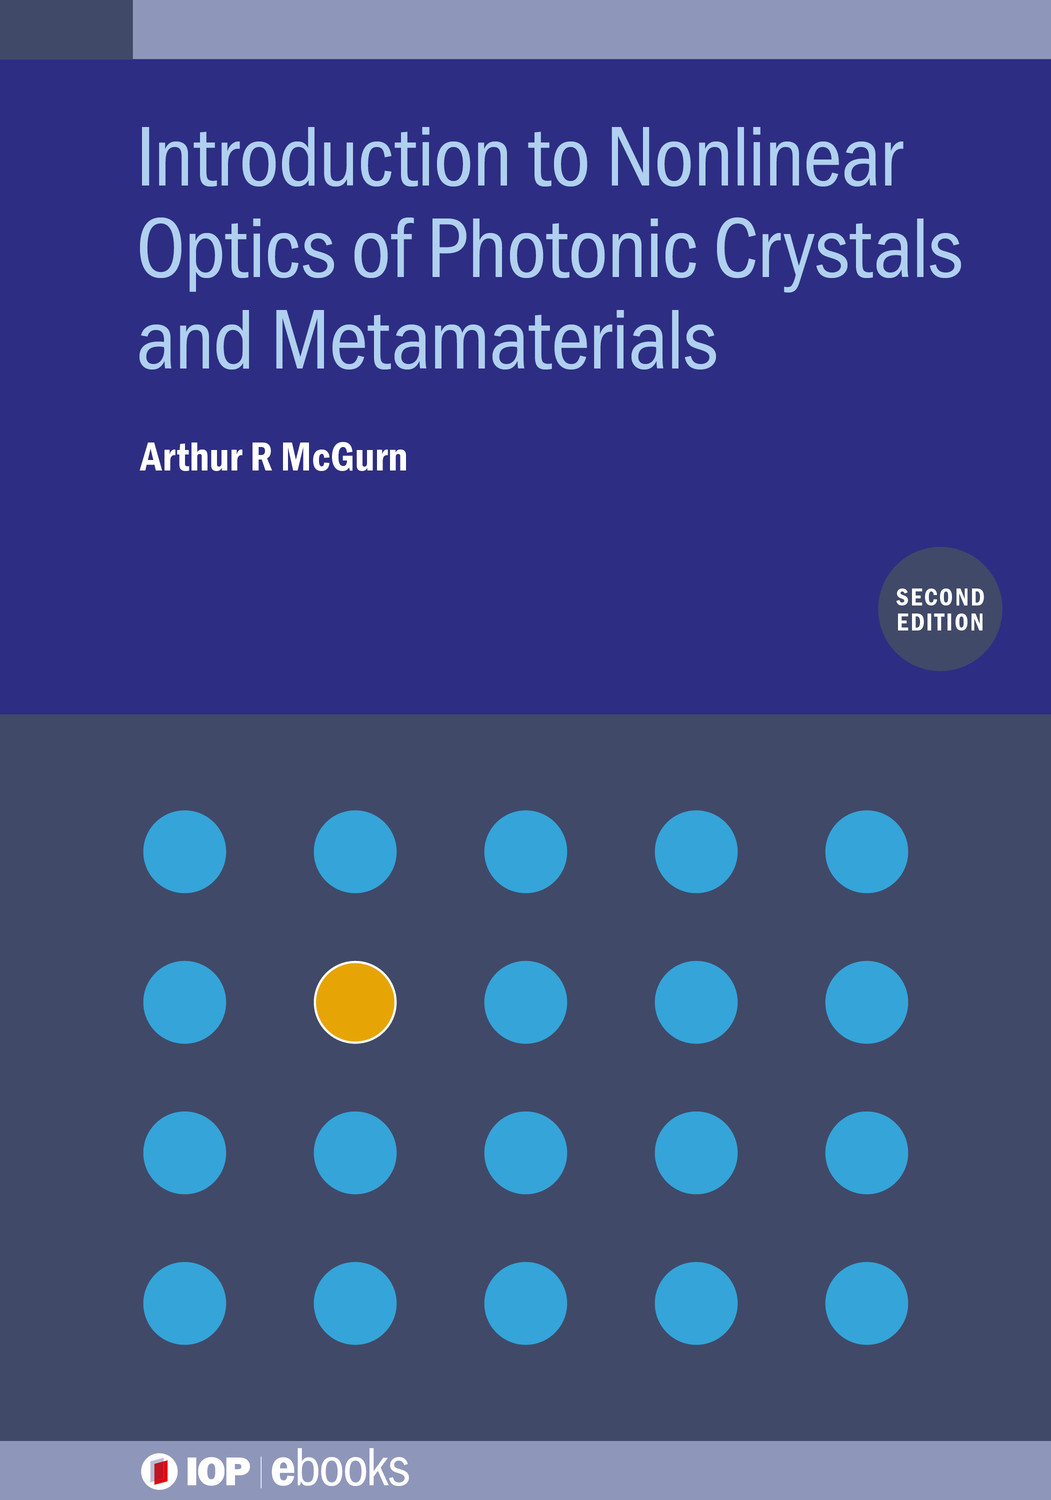 Introduction to Nonlinear Optics of Photonic Crystals and Metamaterials (Second Edition) -  2nd Edition